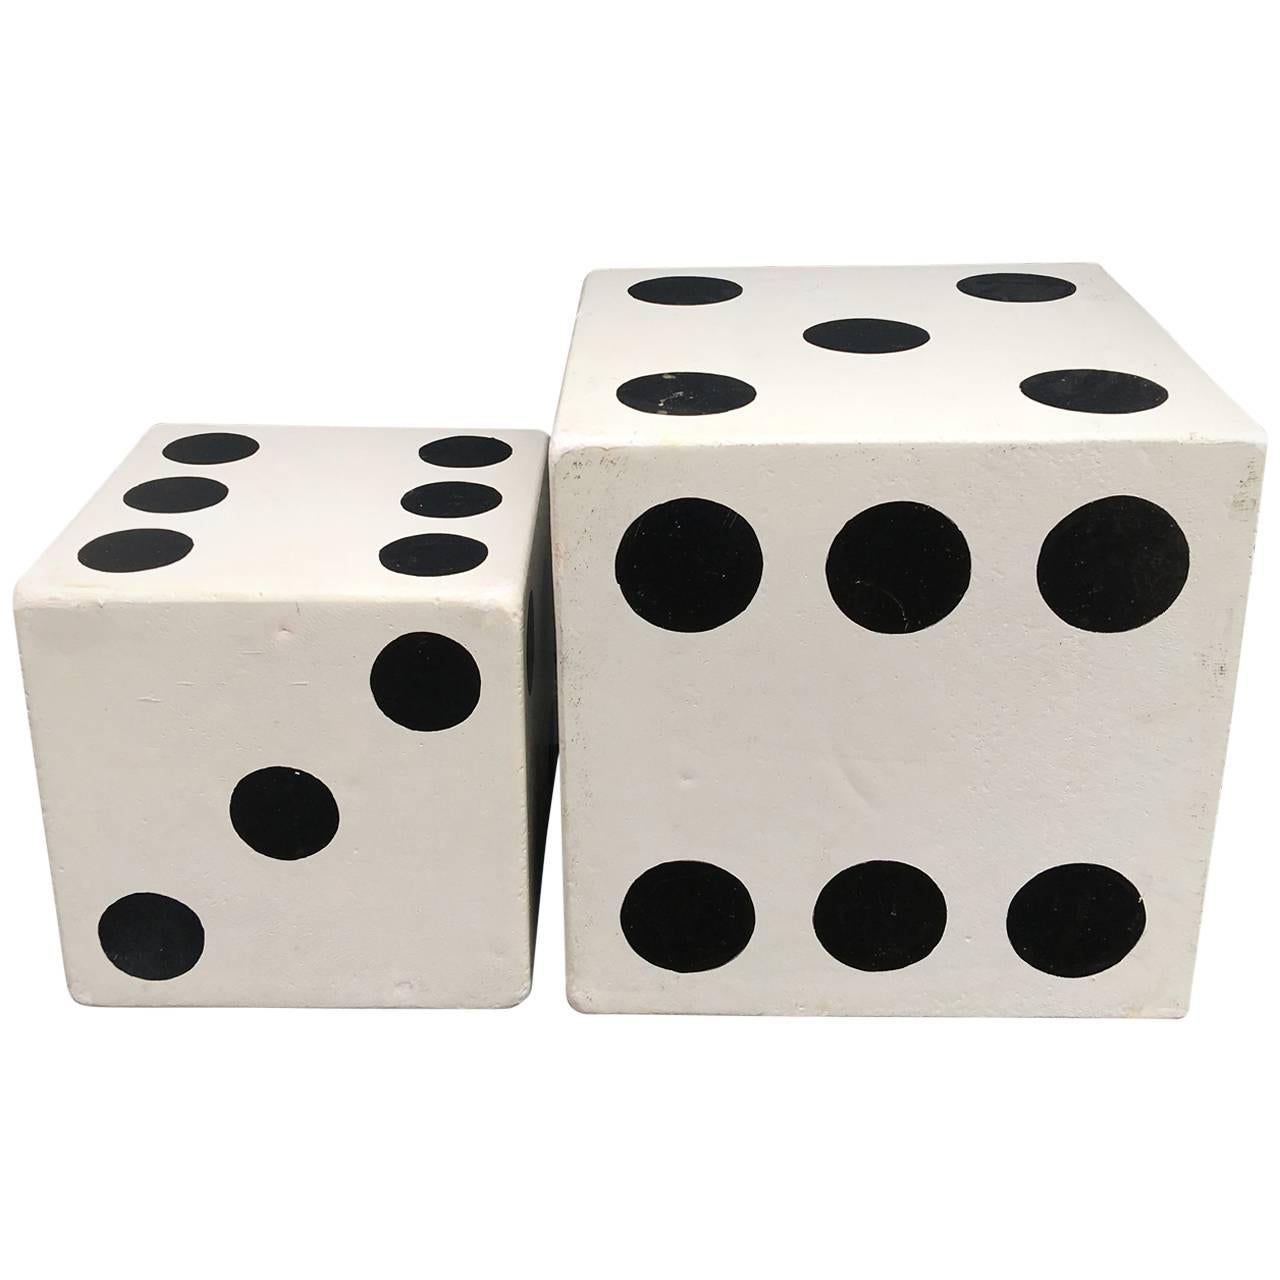 One small and one large end tables in the shape of a dice.